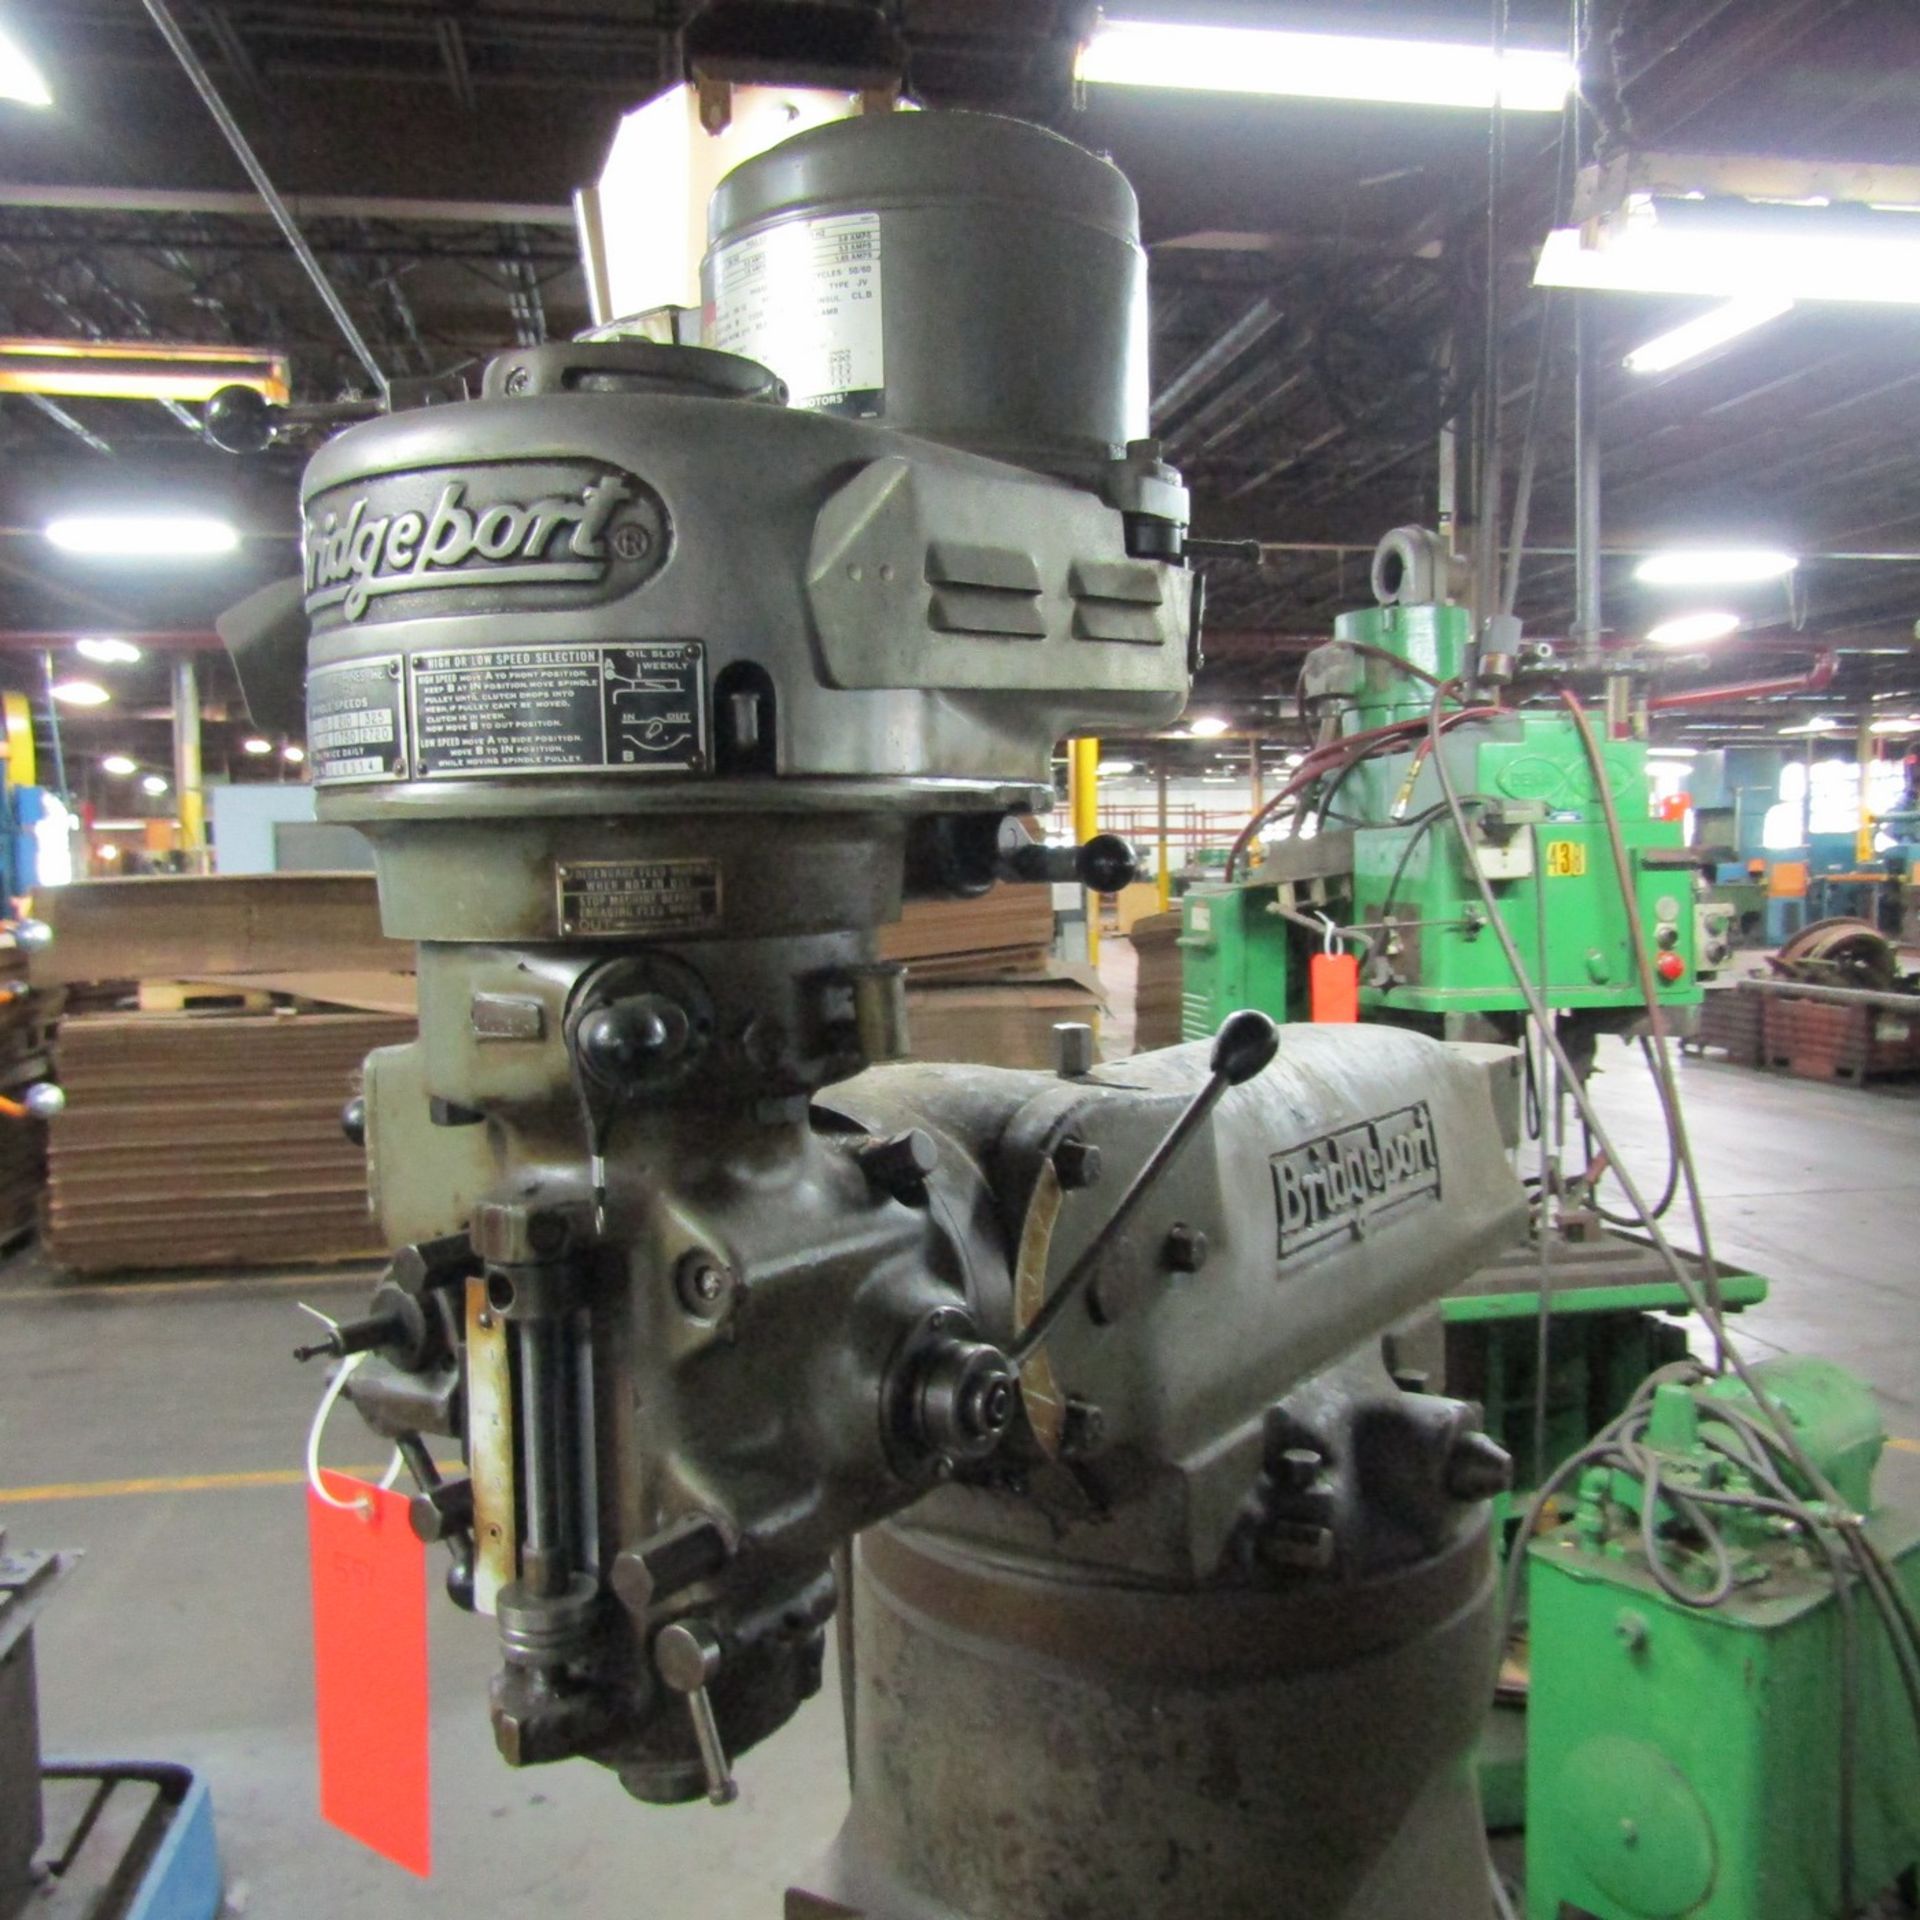 Bridgeport 1-HP Vertical Milling Machine, S/N: BR101846; with Power Feed Table, 9 in. x 32 in. T- - Image 6 of 6